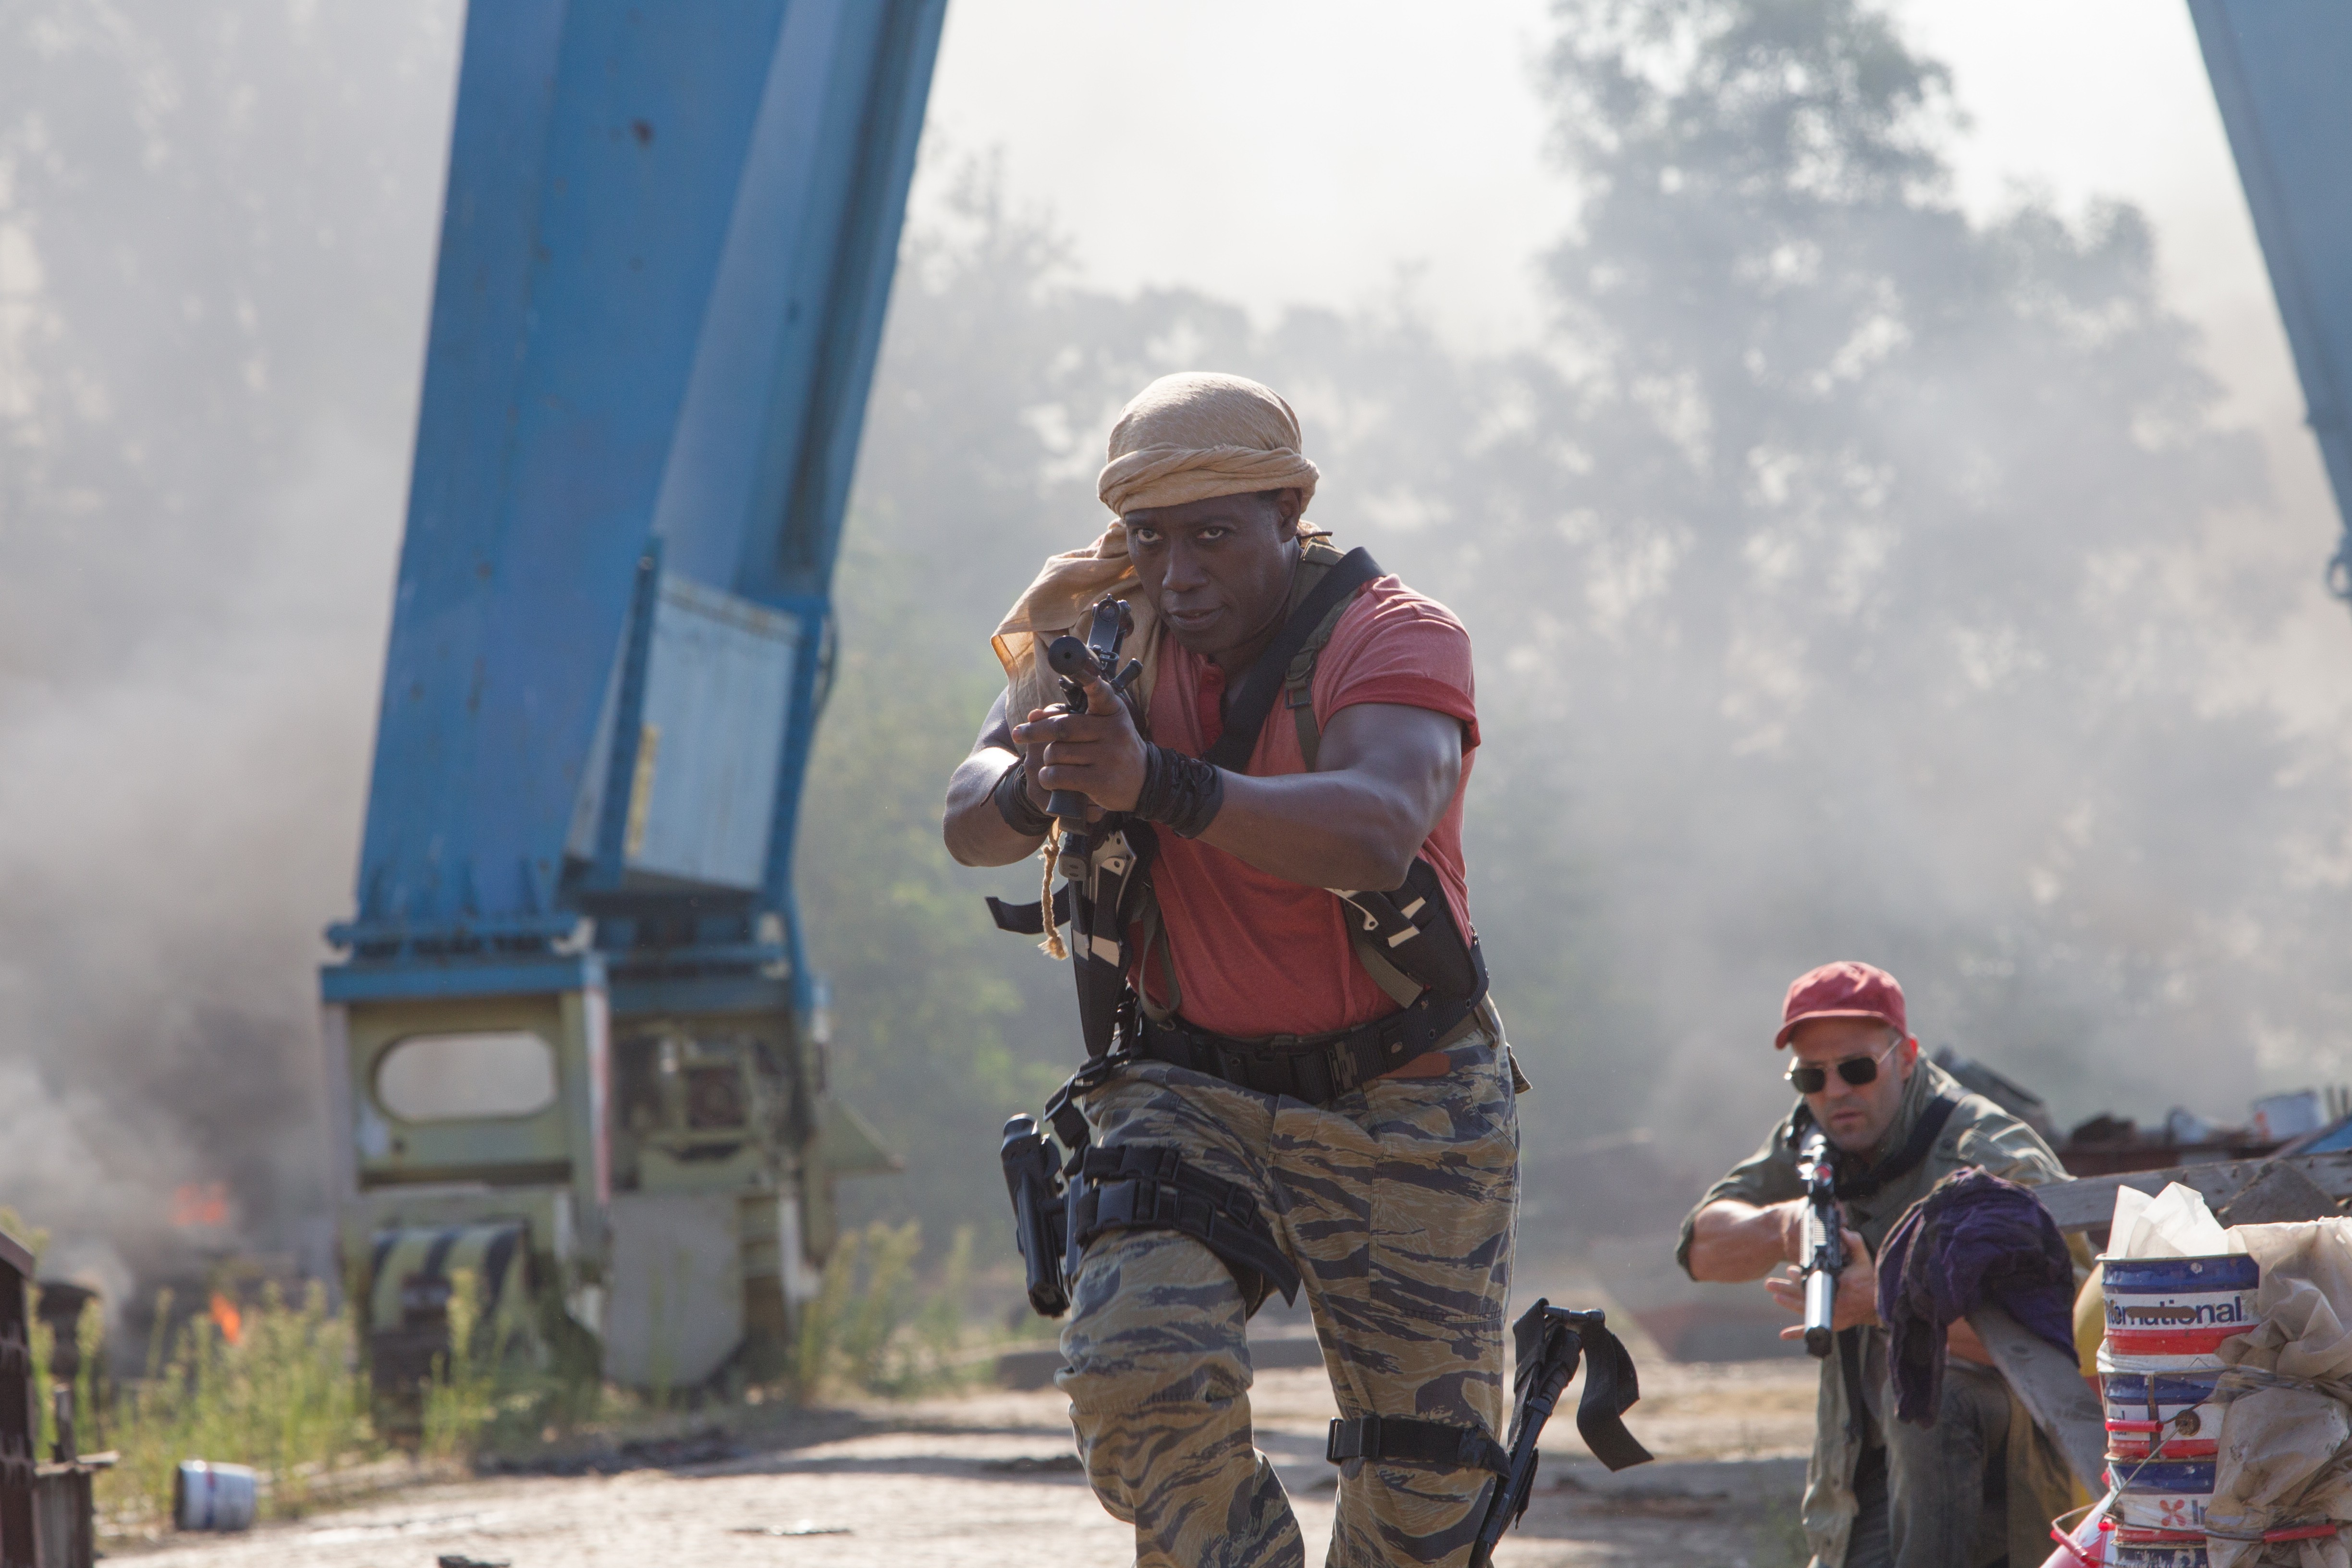 movie, the expendables 3, doc (the expendables), jason statham, lee christmas, wesley snipes, the expendables